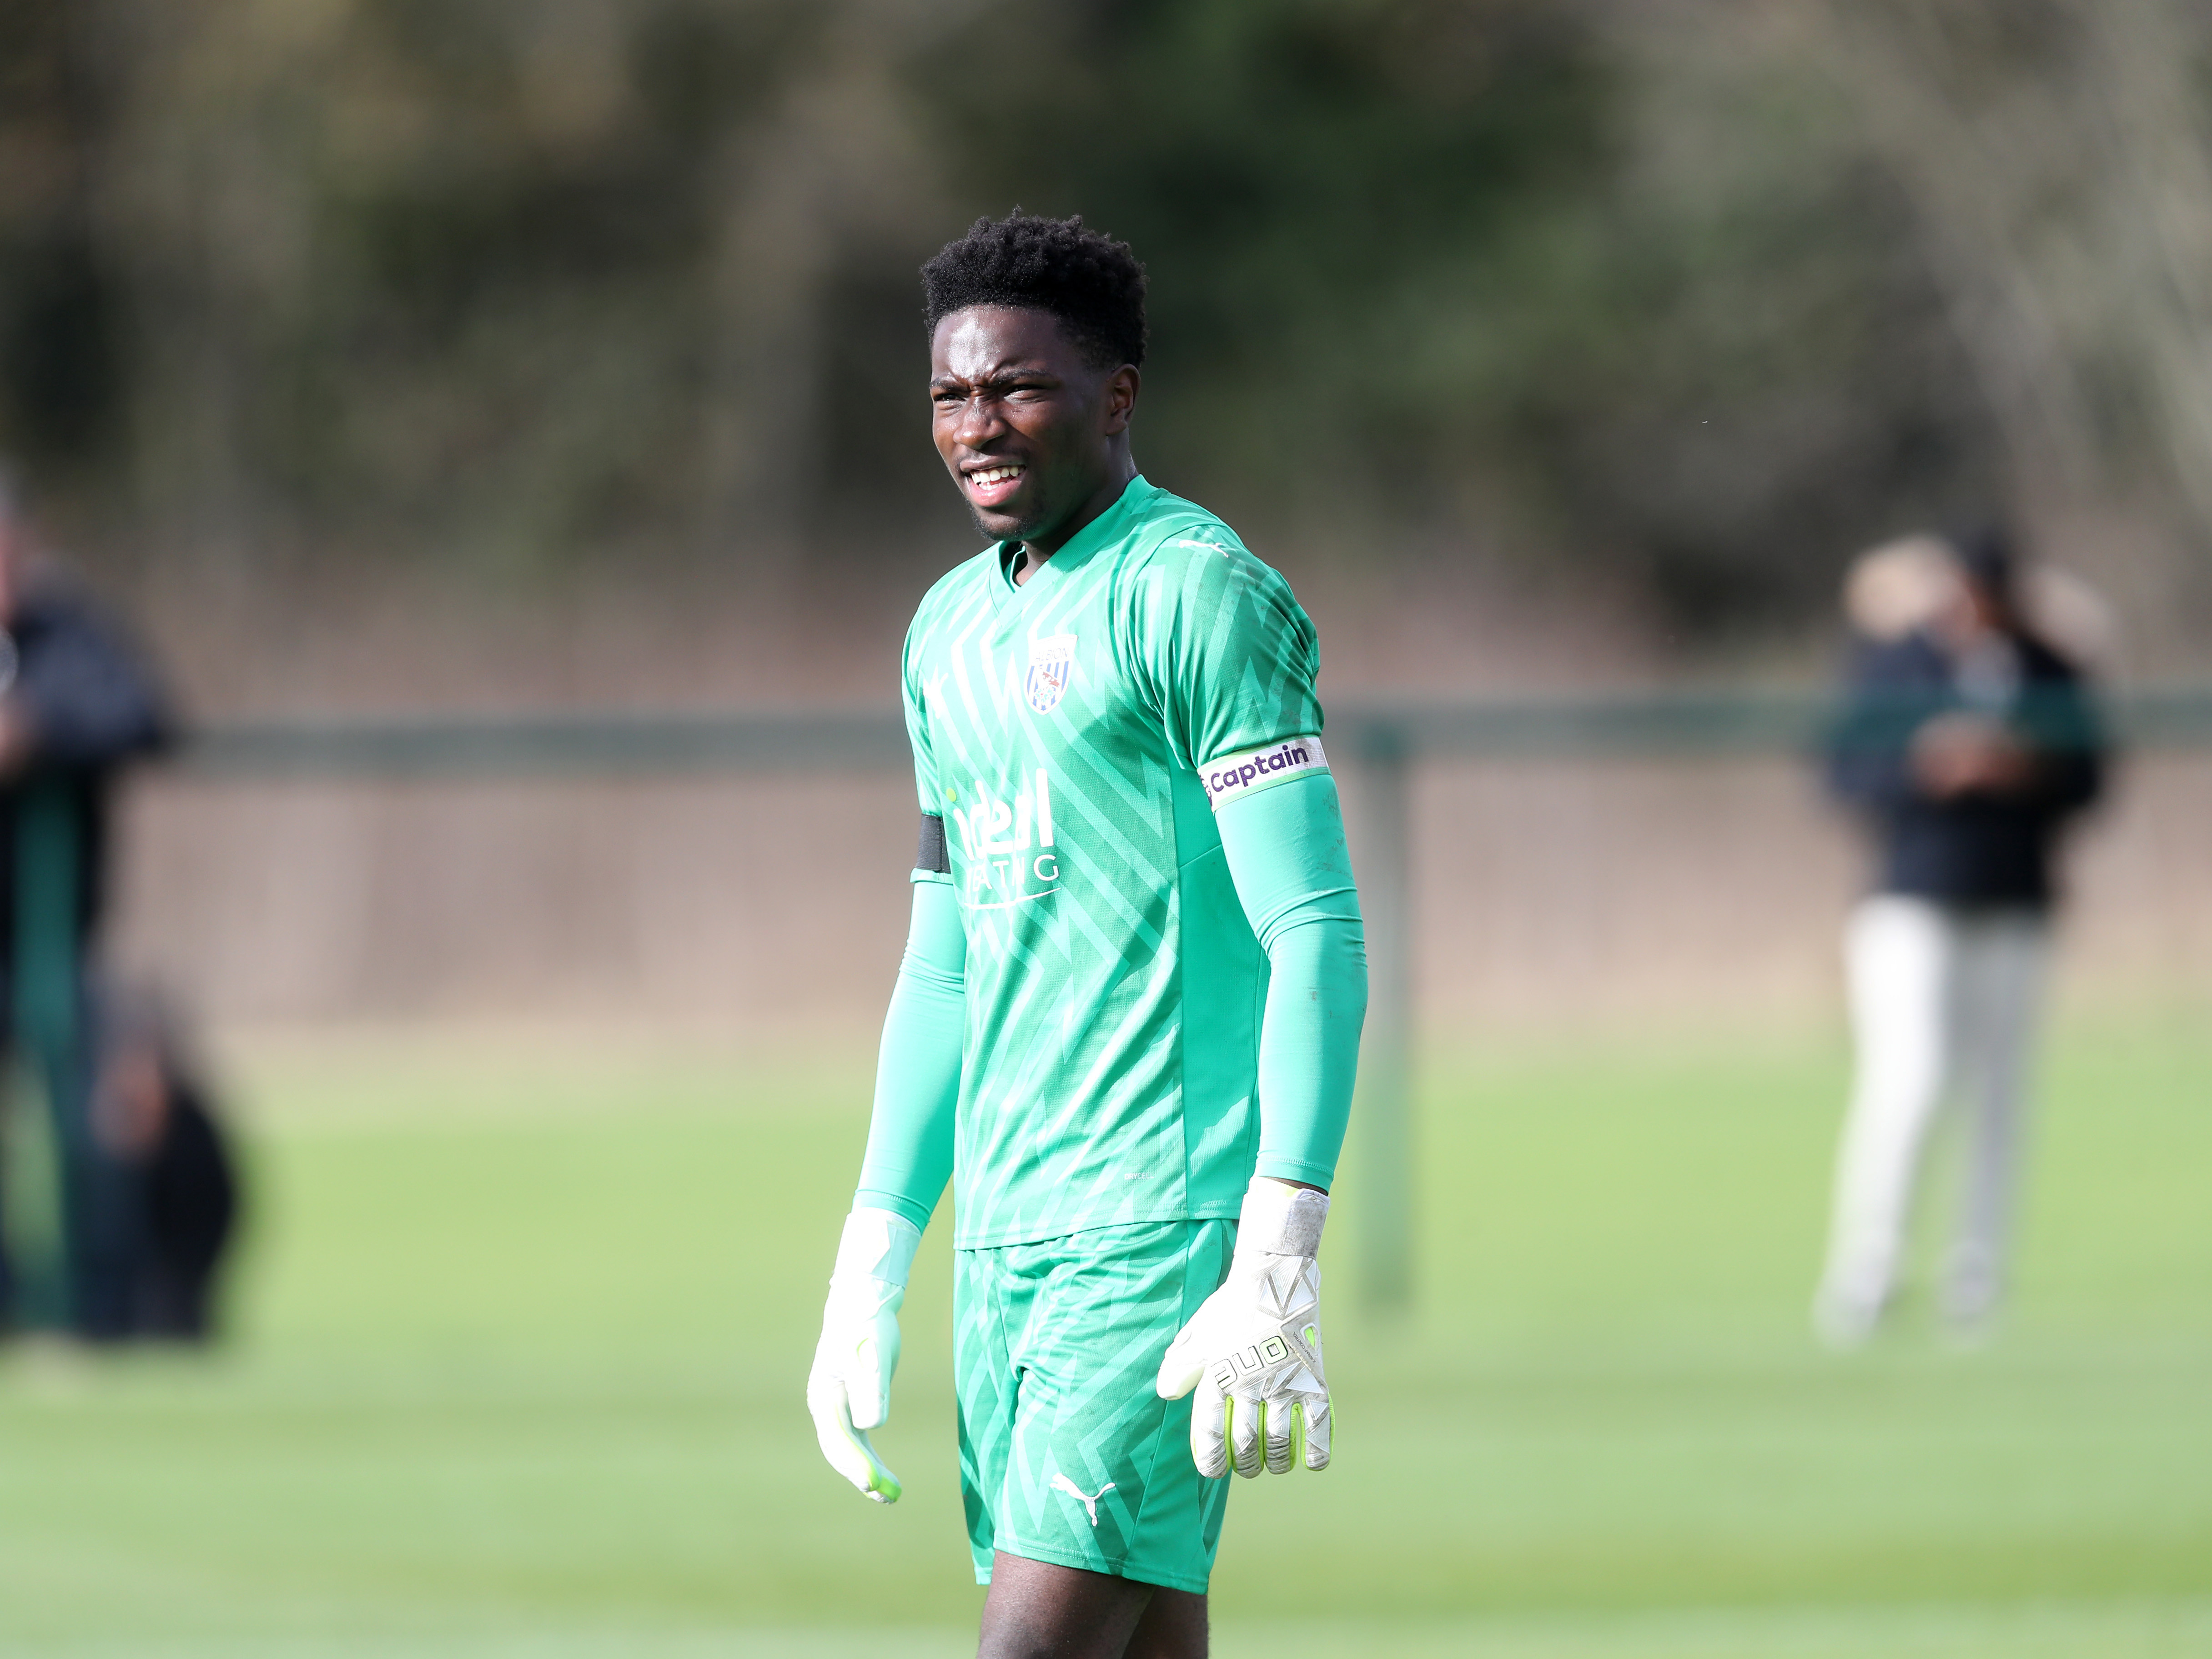 A photo of Albion academy goalkeeper Ben Cisse in action for the PL2 team at the club's training ground